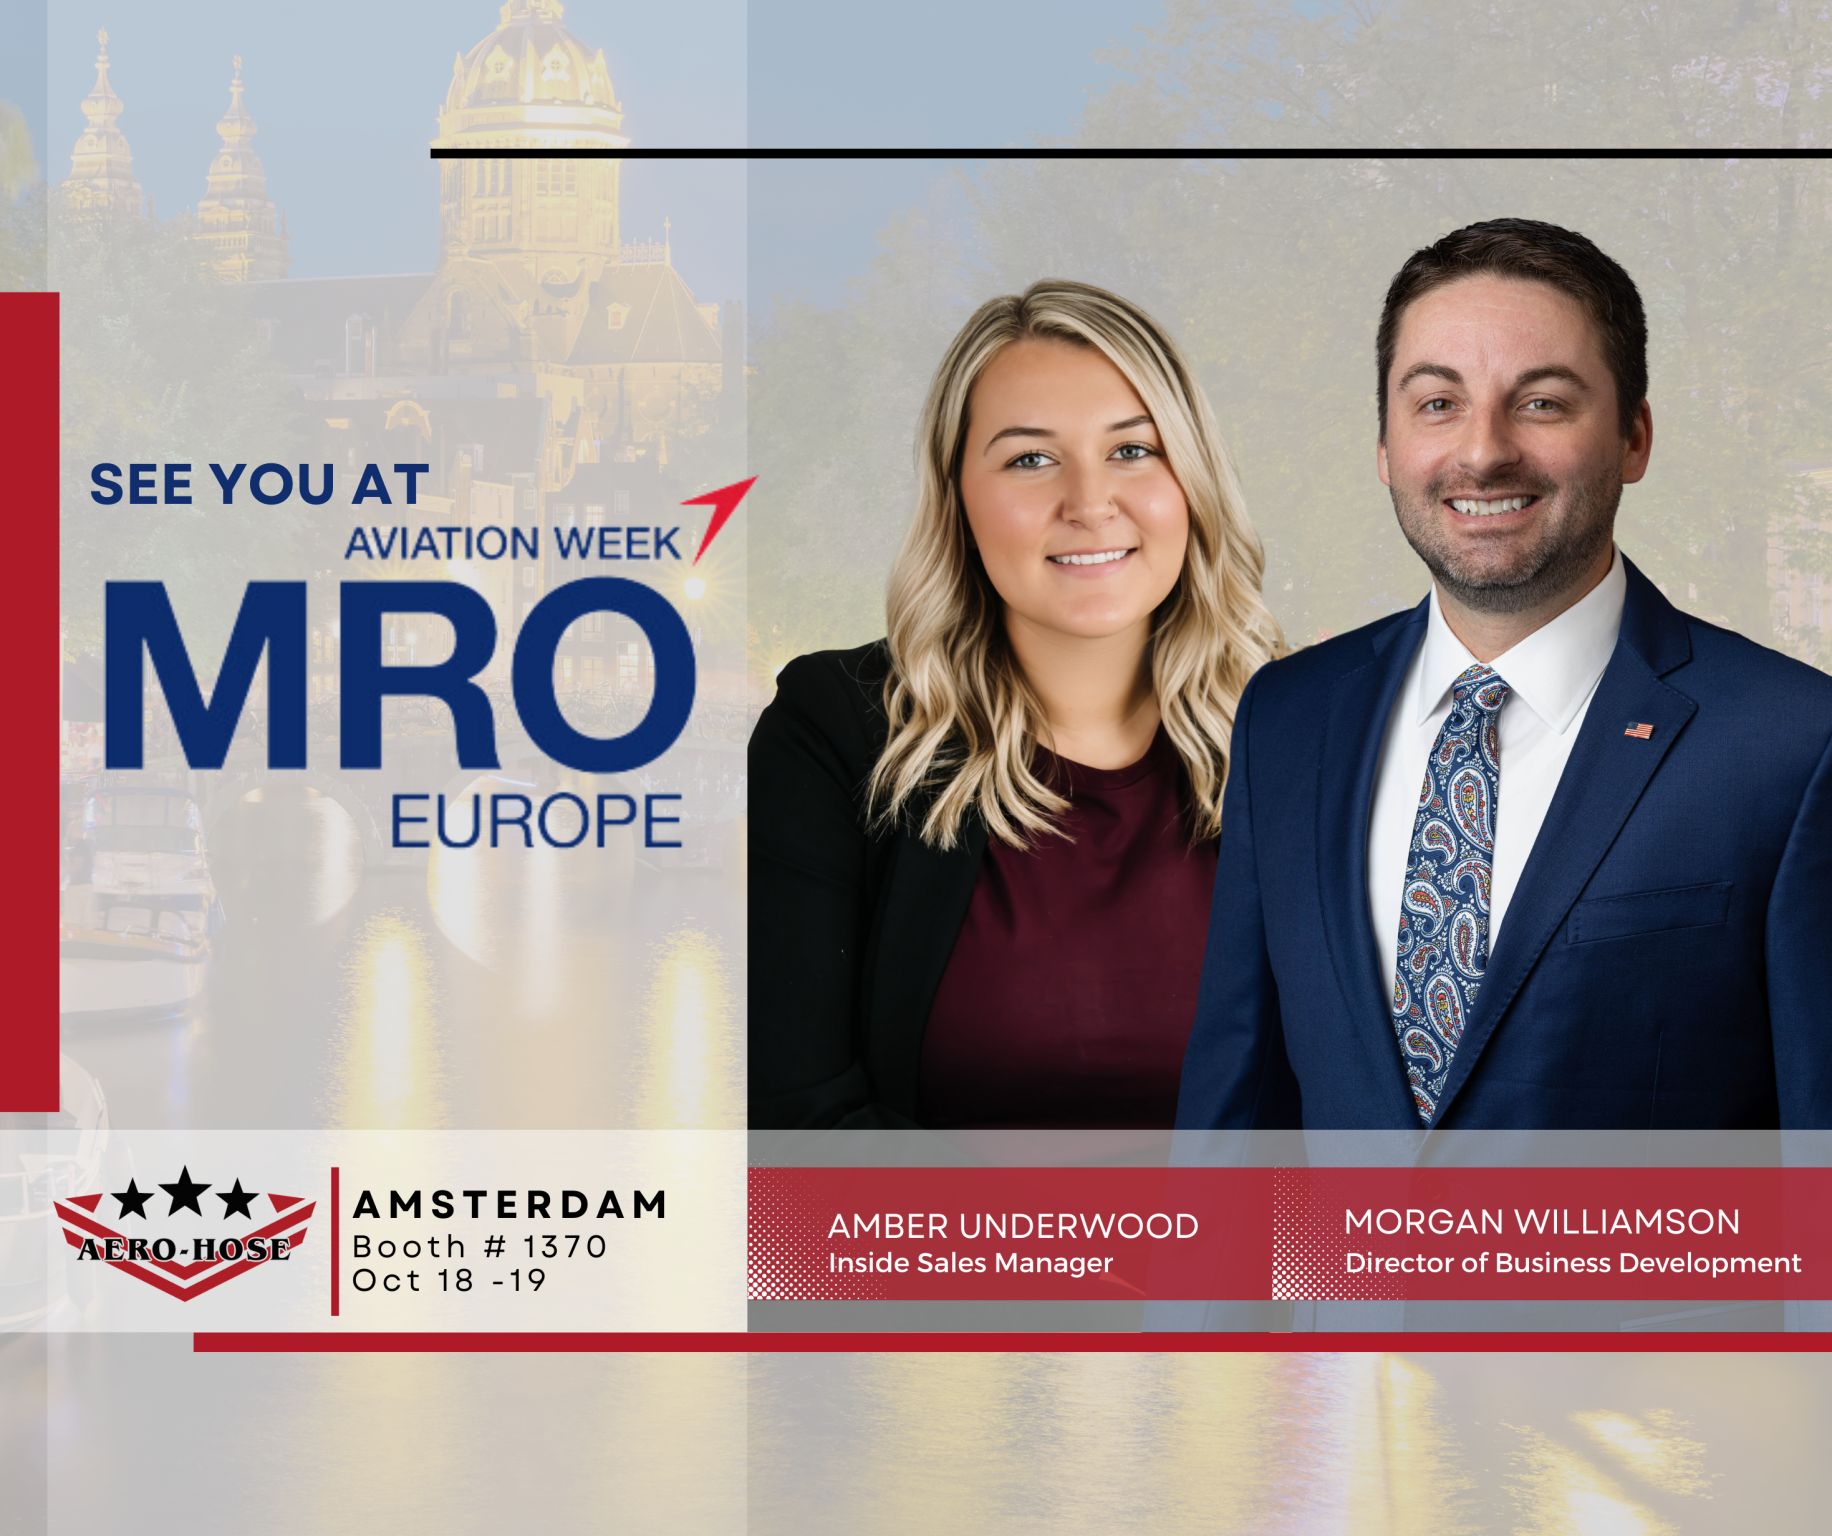 promotional graphic for mro europe event featuring two professionals, amber underwood and morgan williamson, with an amsterdam cityscape in the background. this seo-optimized description highlights key attendees and the scenic venue